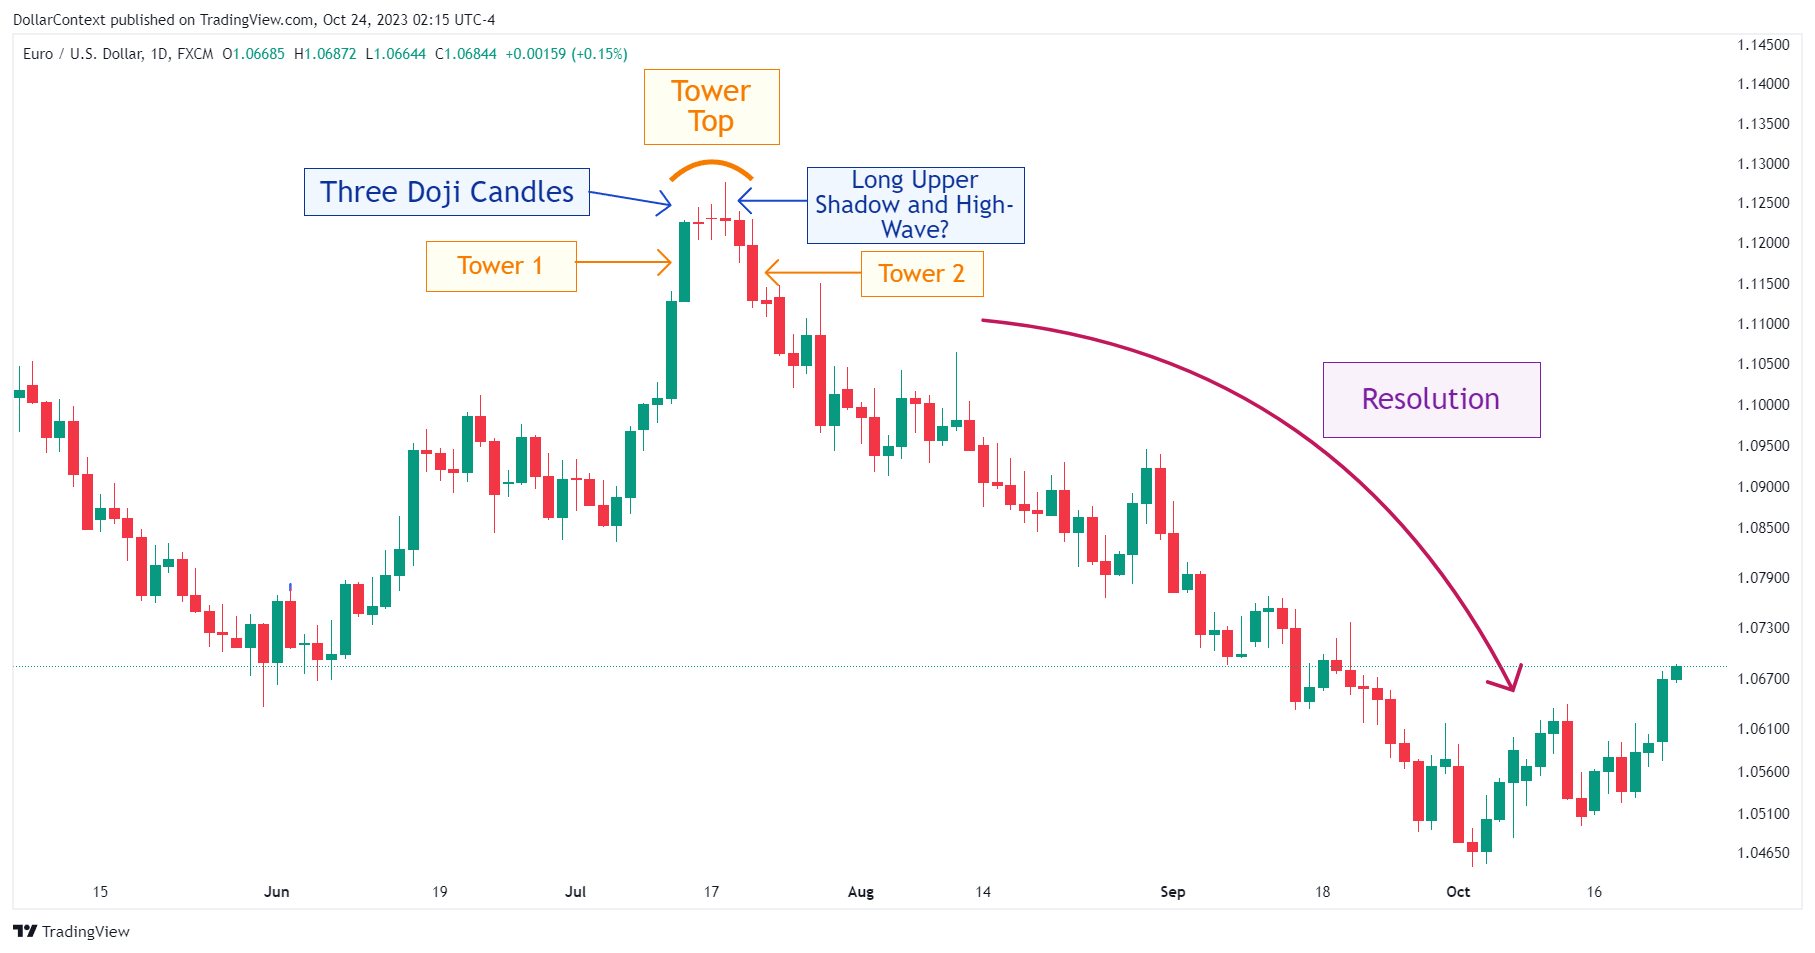 EUR/USD: Downtrend from Mid-July to Early October 2023 (Daily Chart)